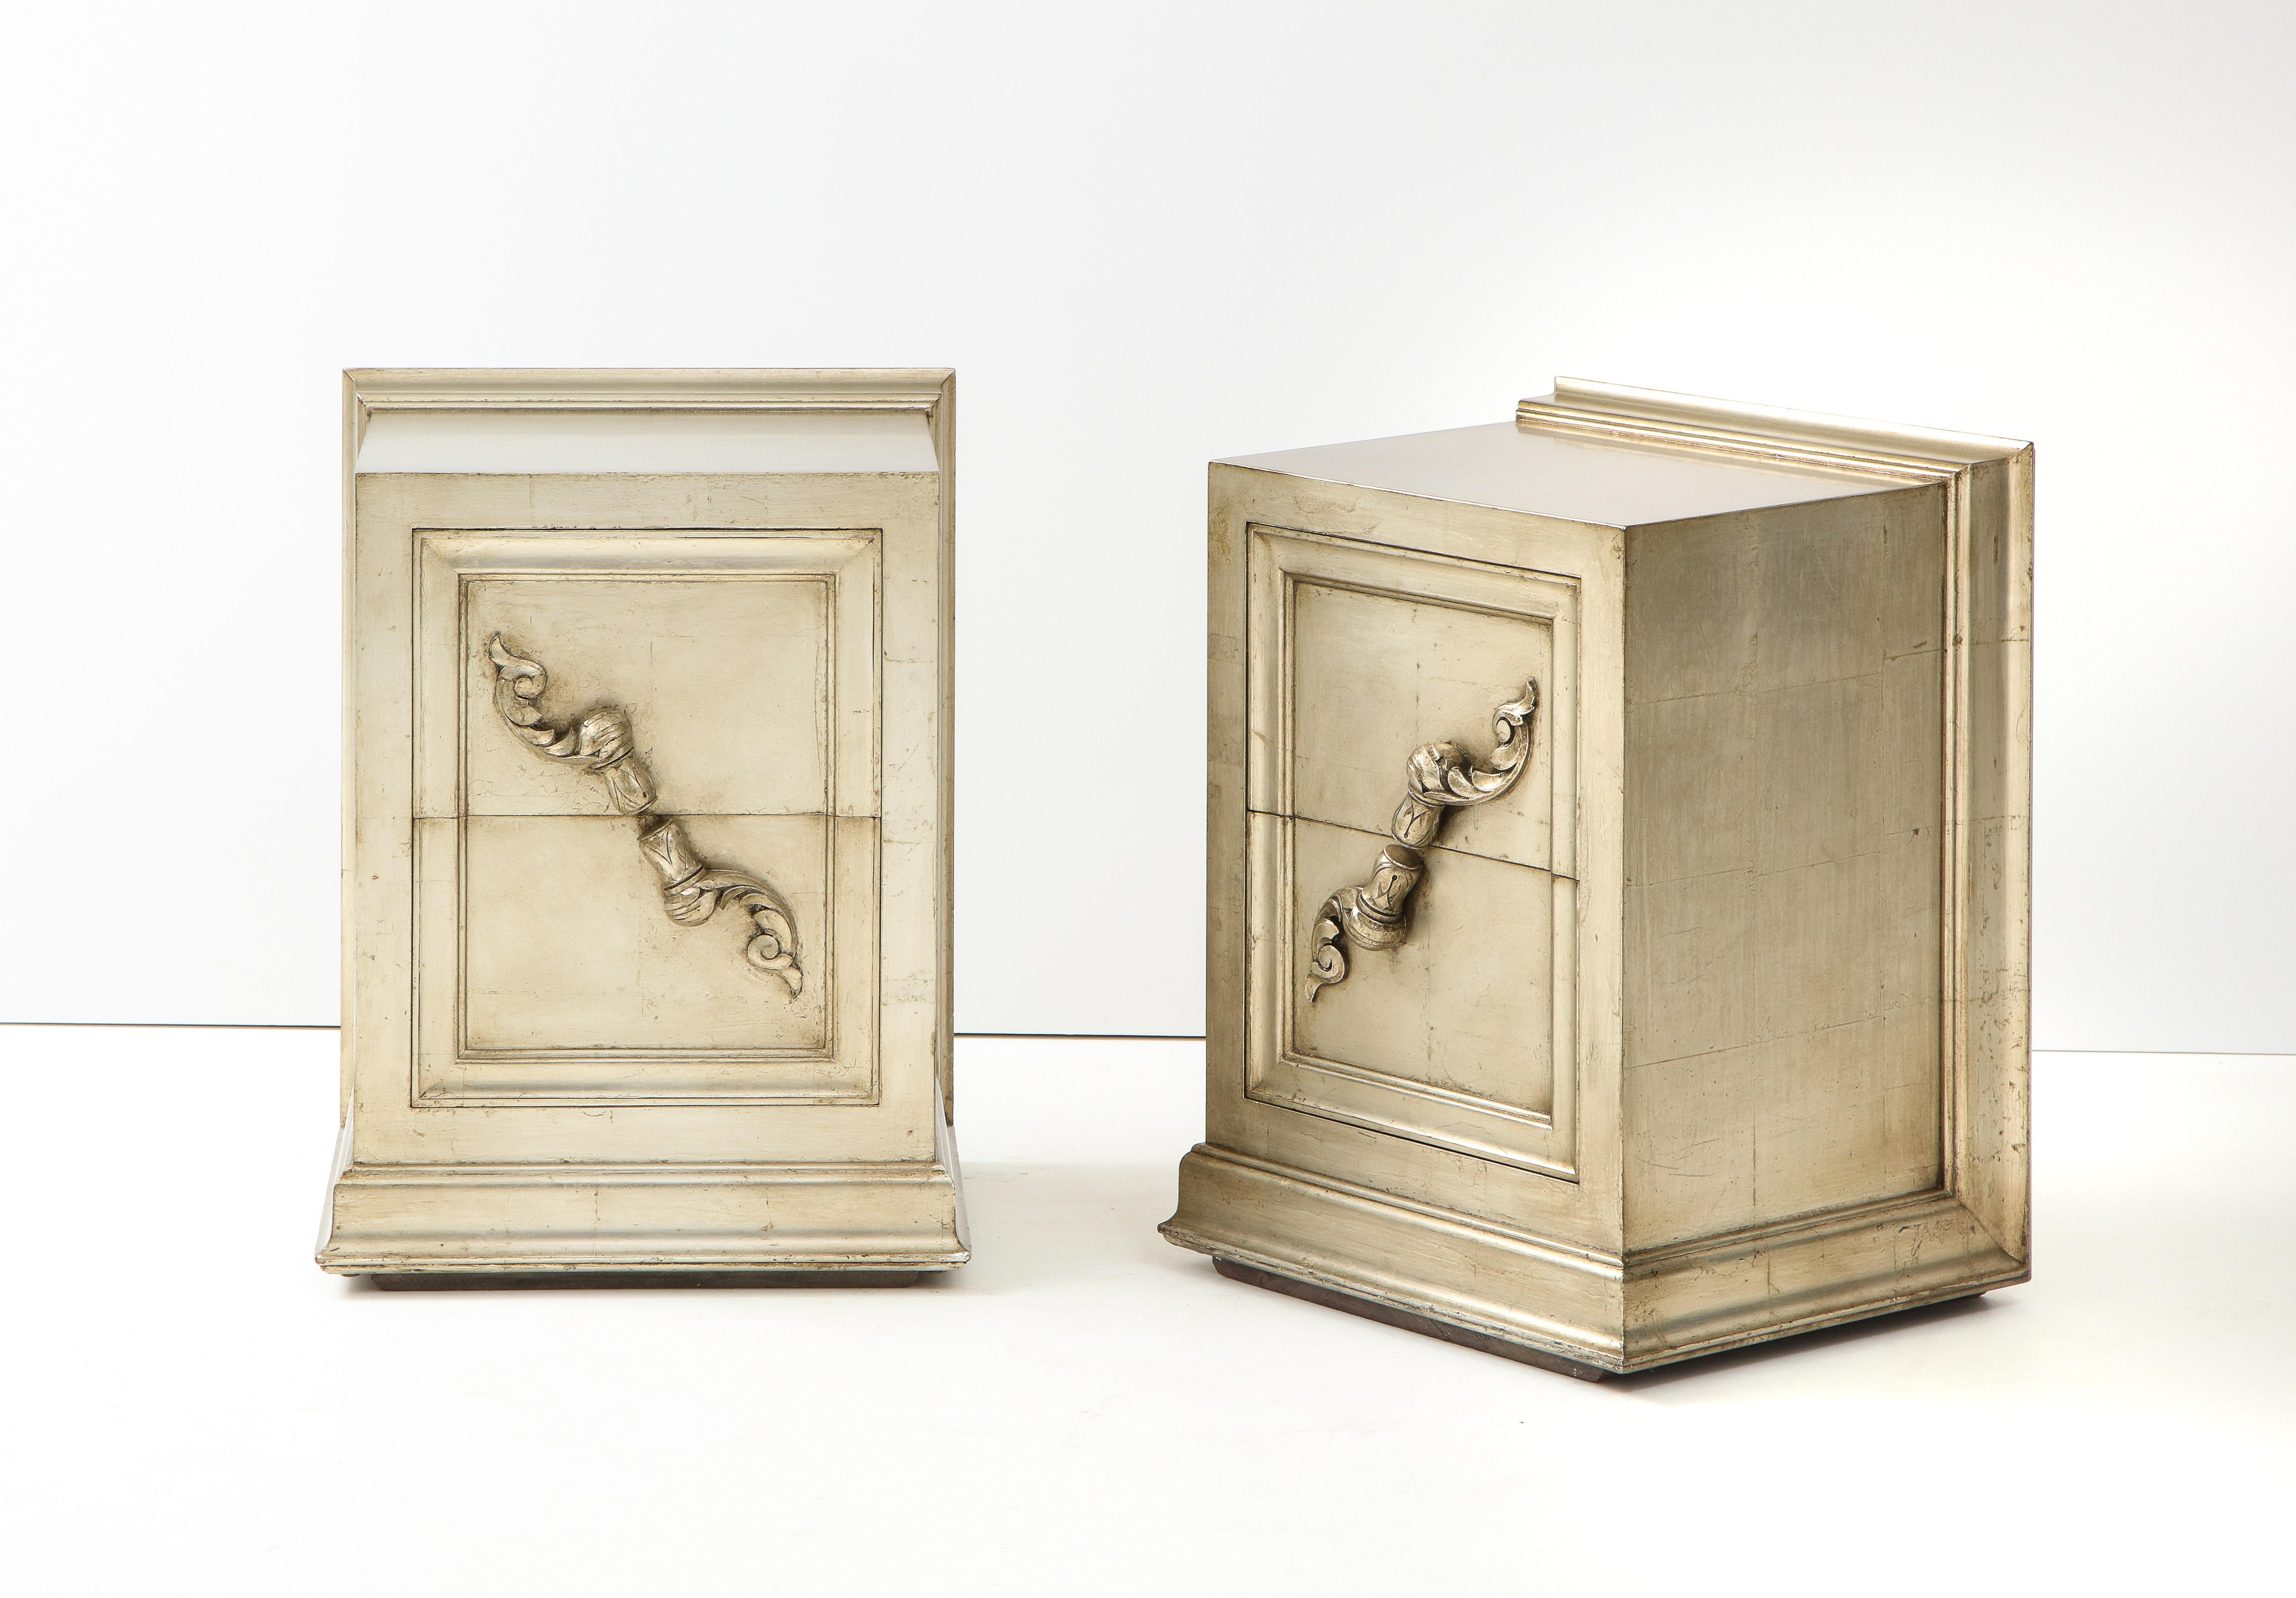 Spectacular Pair of Rare James Mont Scroll Cabinets In Good Condition For Sale In New York, NY